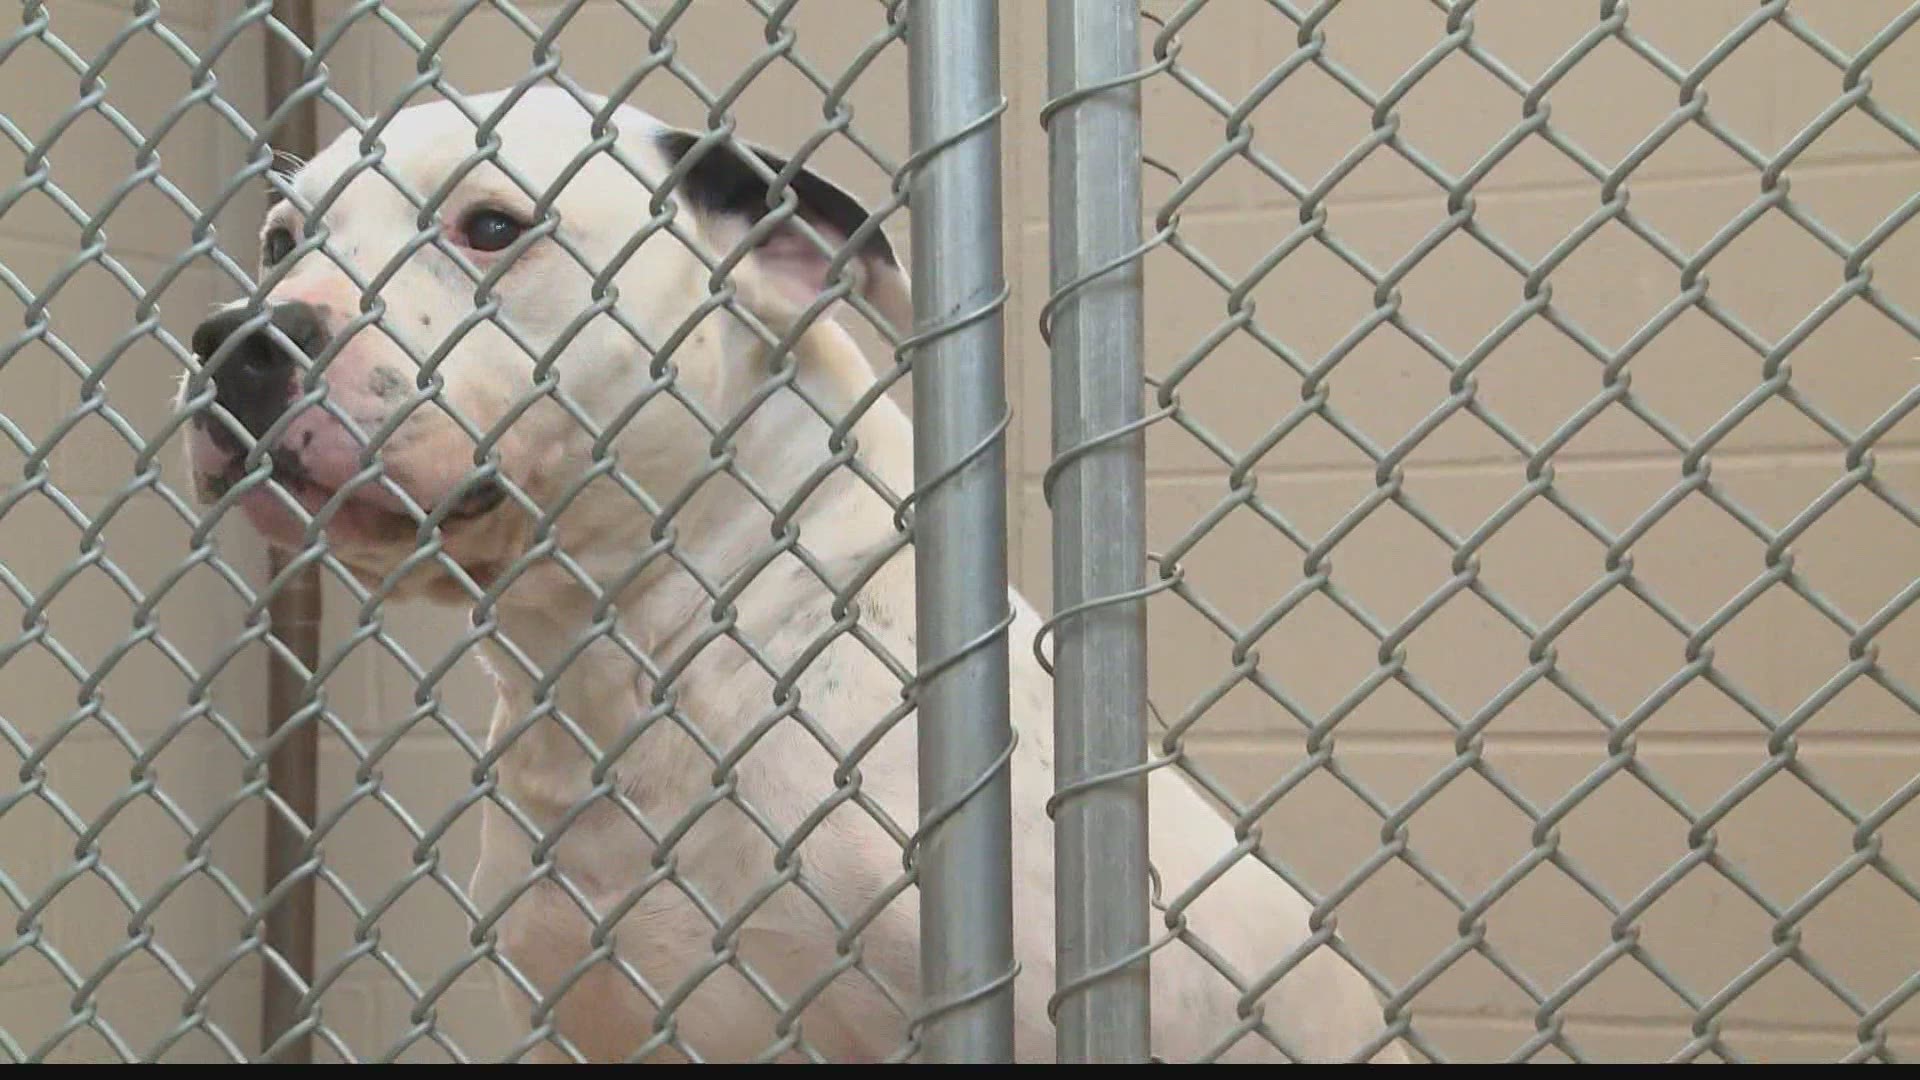 The South Bend Animal Shelter said Kane was one of its longest ever residents.